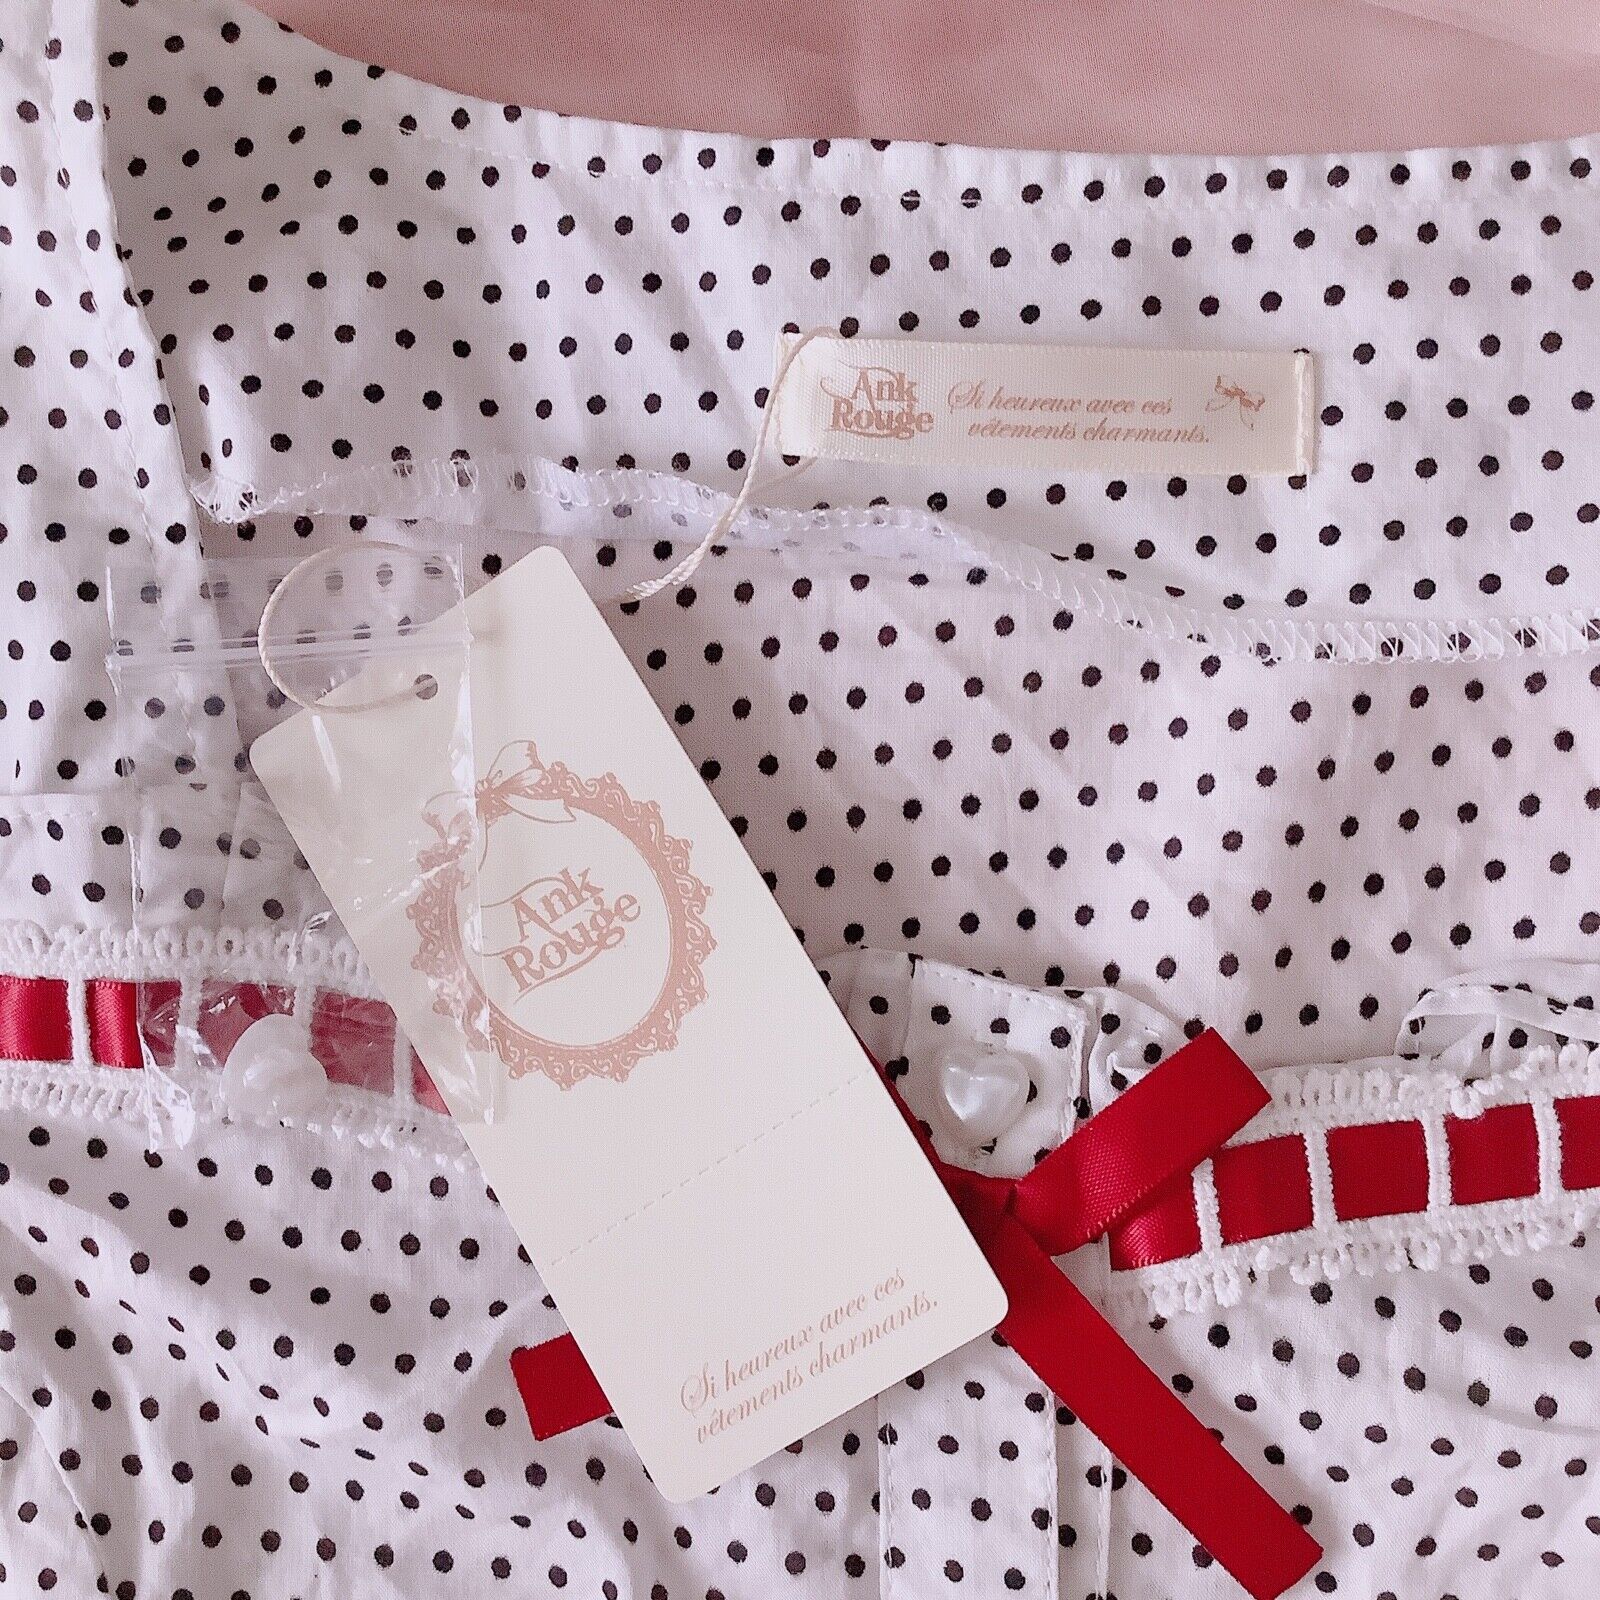 Ank Rouge Polka Dot Ribbon Blouse (White) New with tags